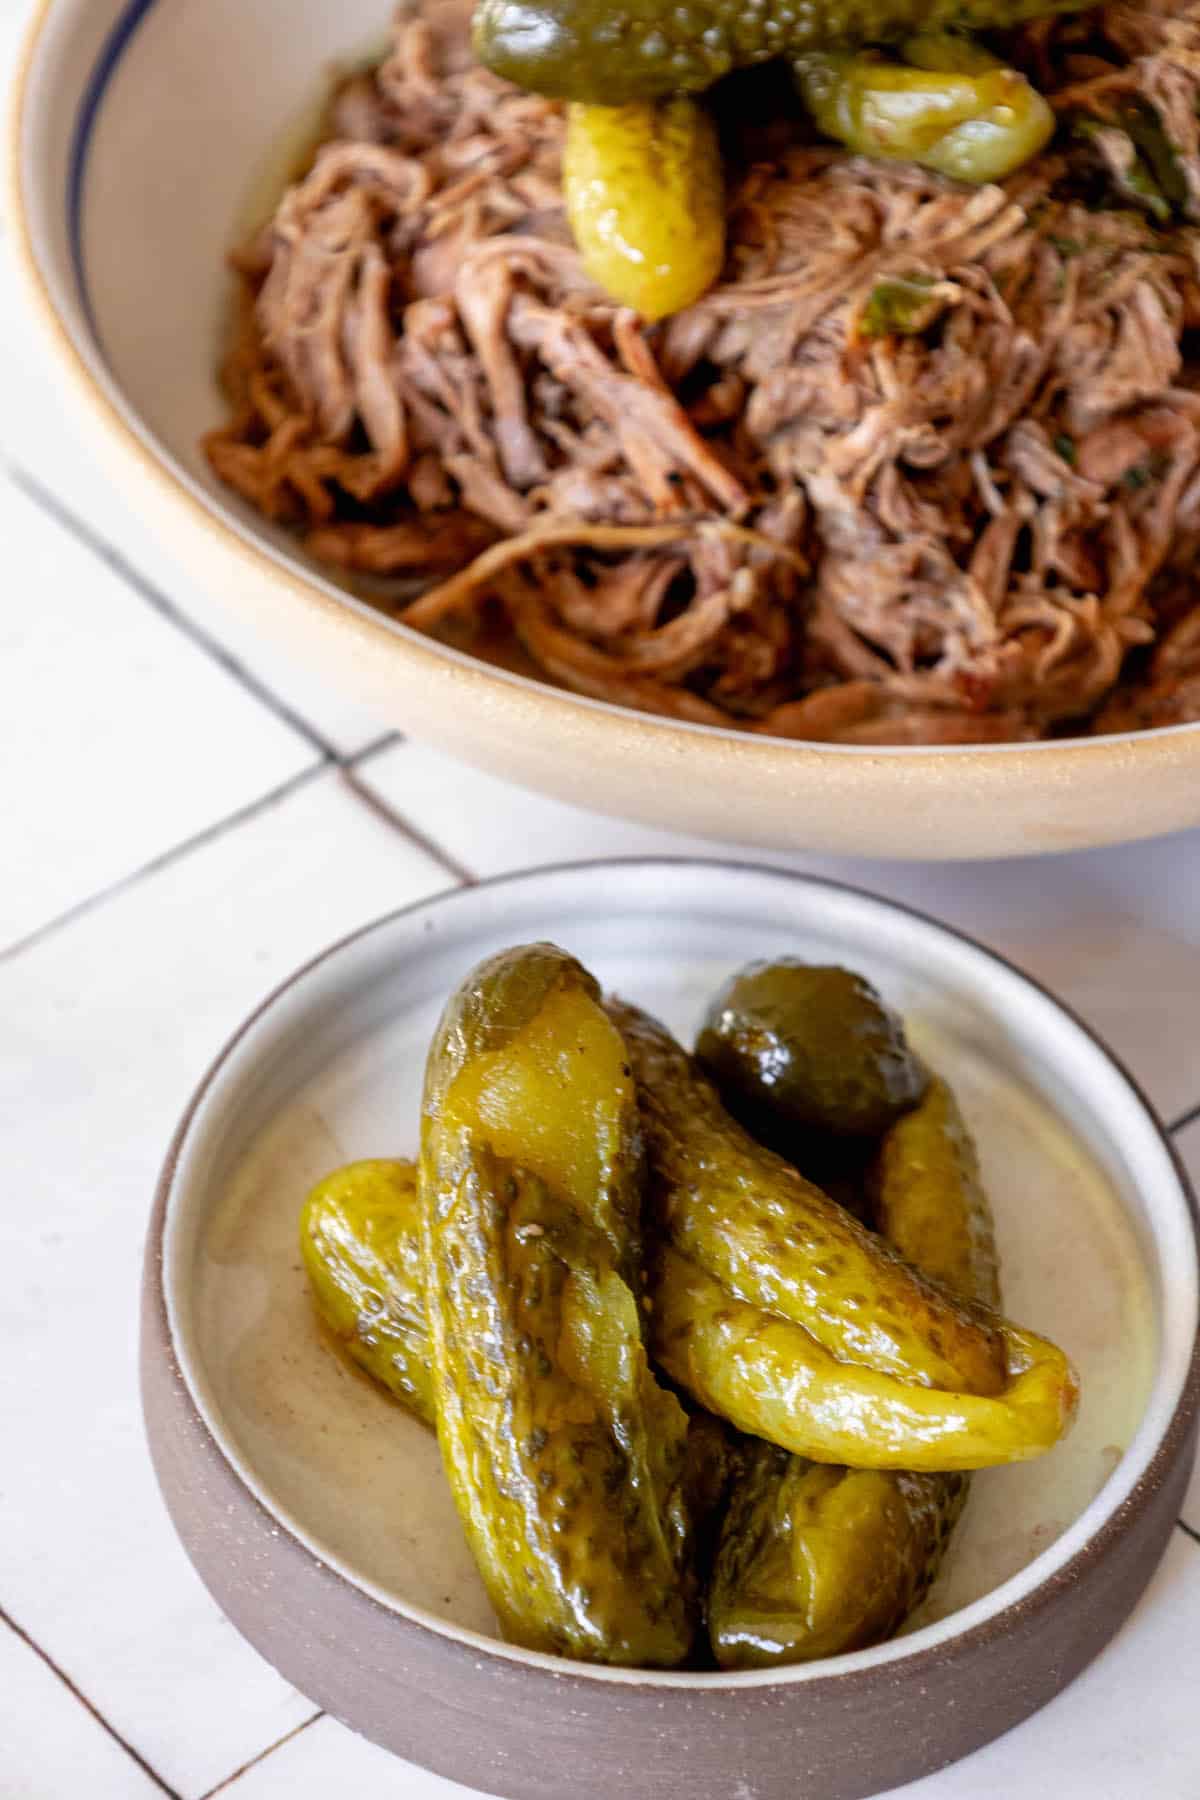 A bowl of pickles next to a serving of beef.